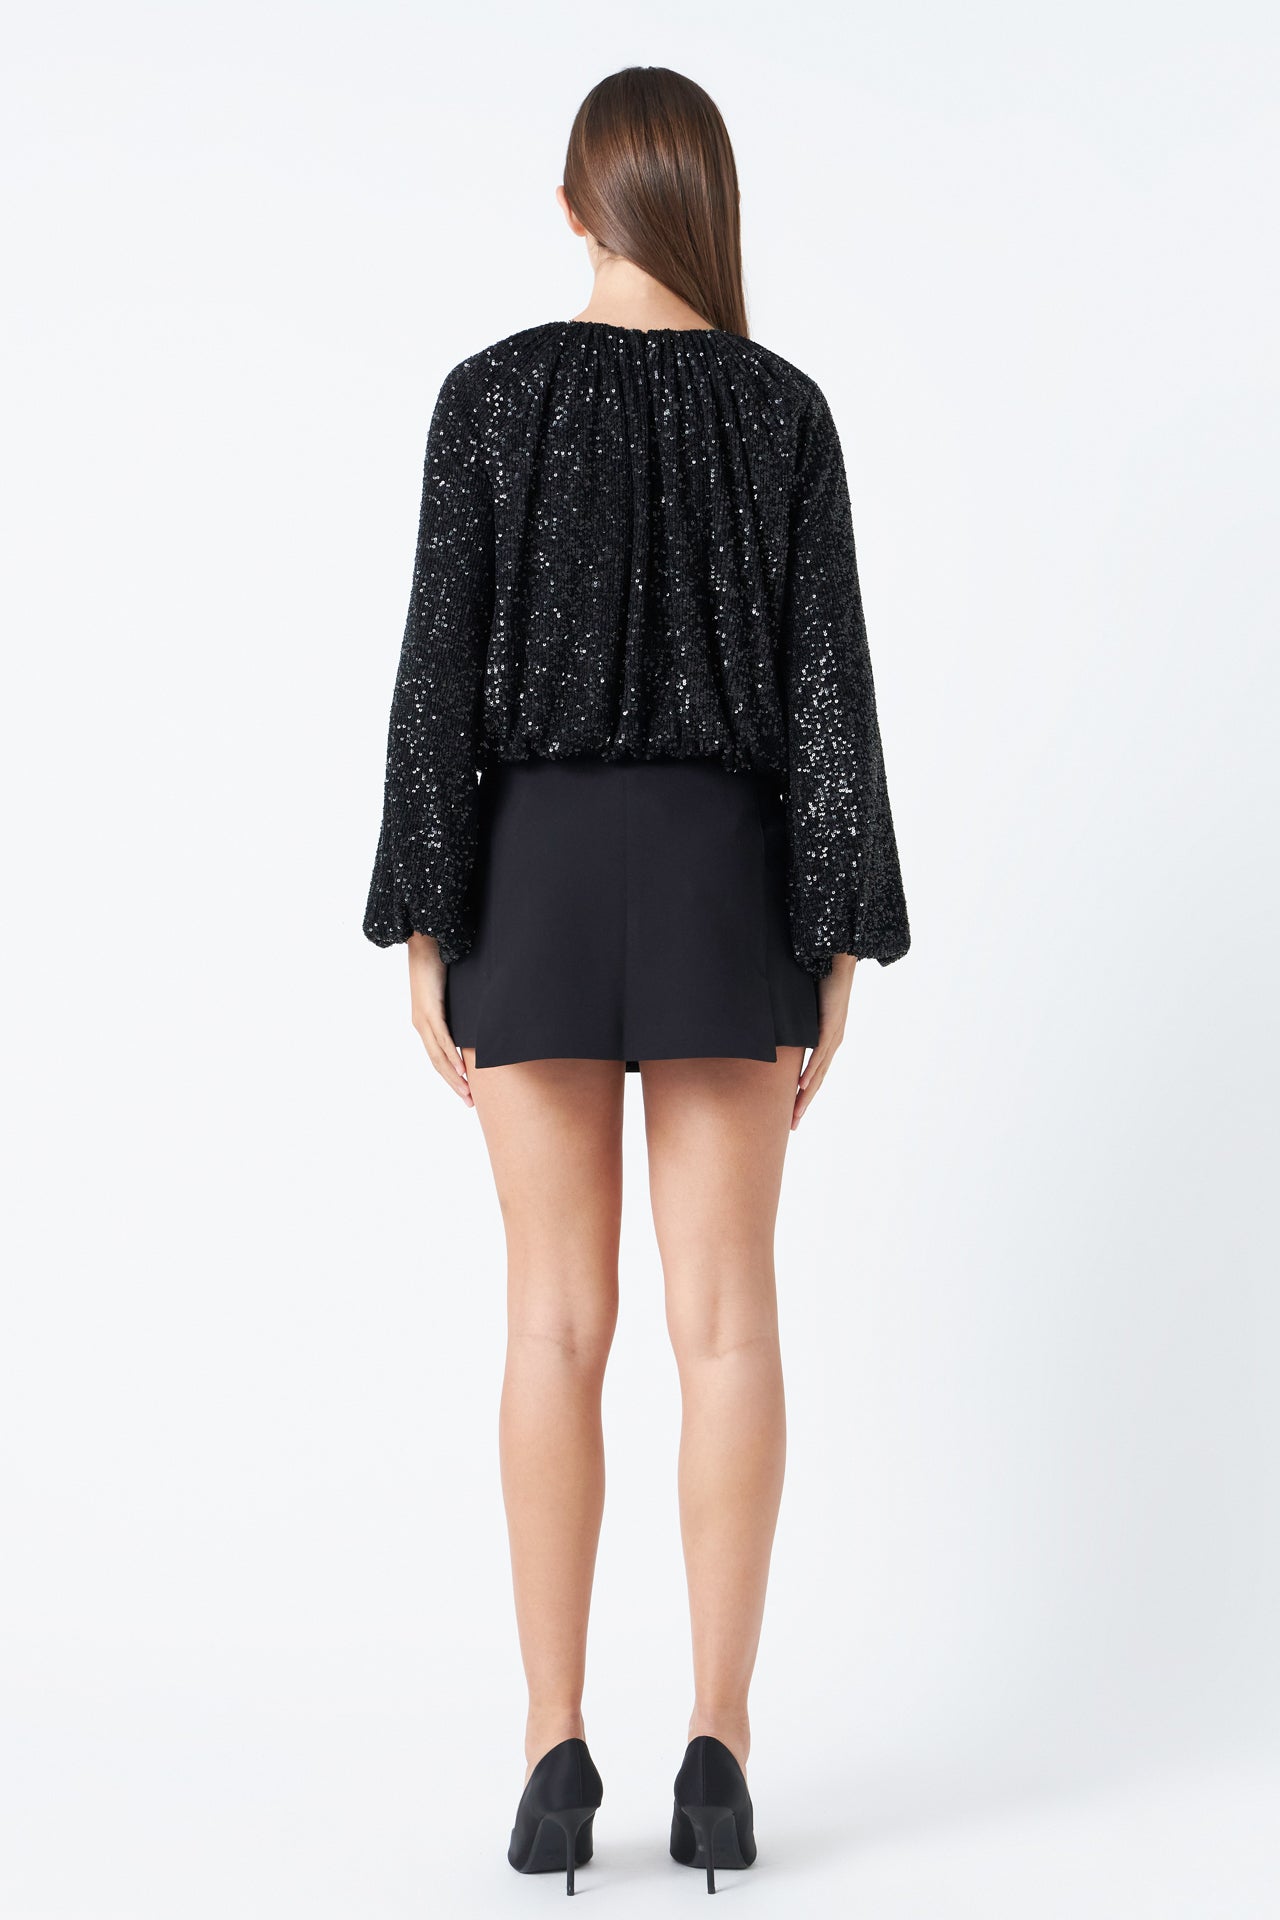 ENDLESS ROSE - Sequins Blouson Top - TOPS available at Objectrare